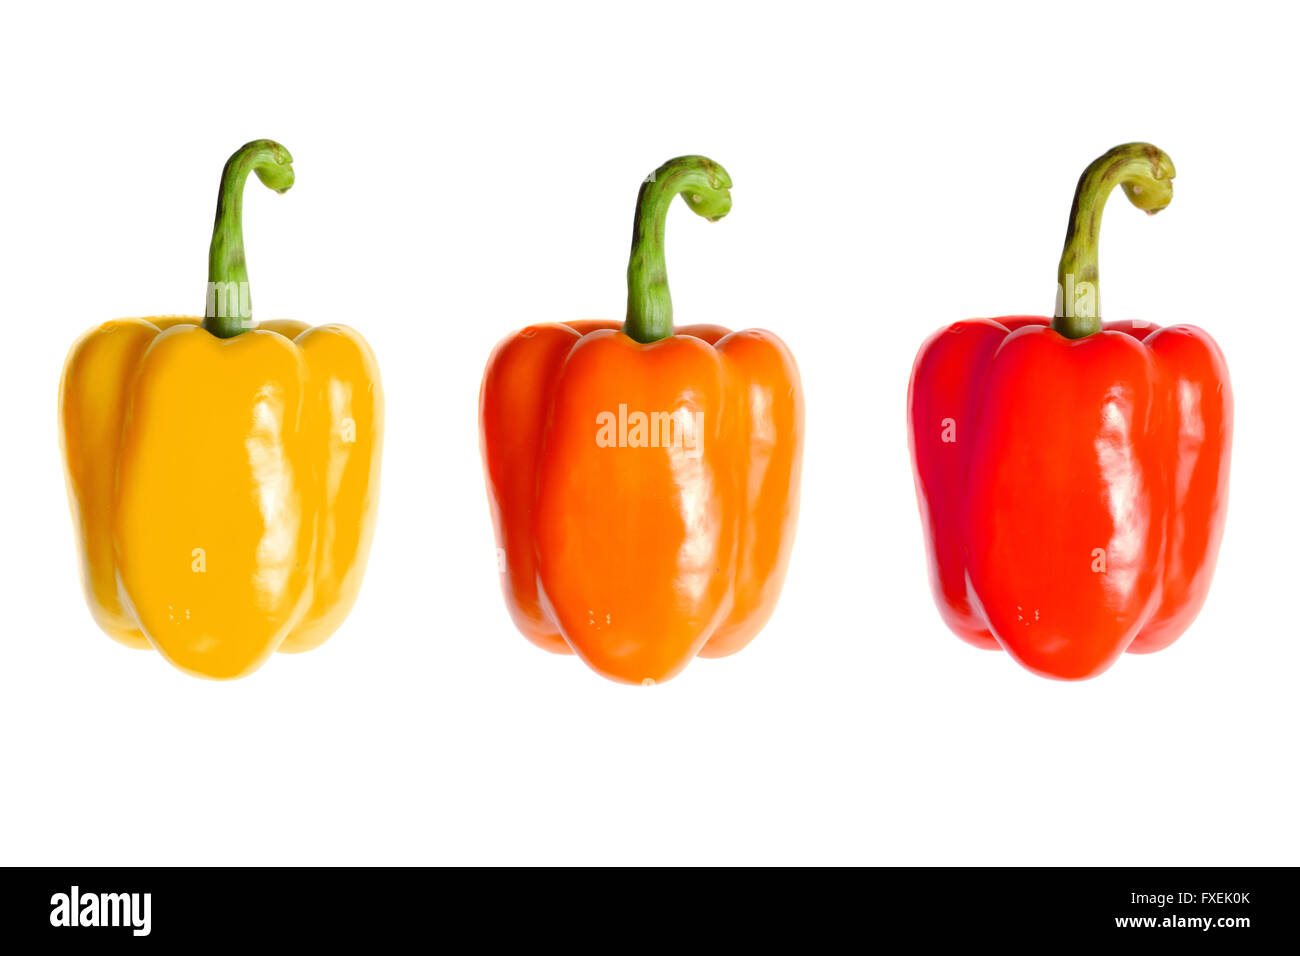 Three bell peppers seen from above photographed against a white background. Stock Photo